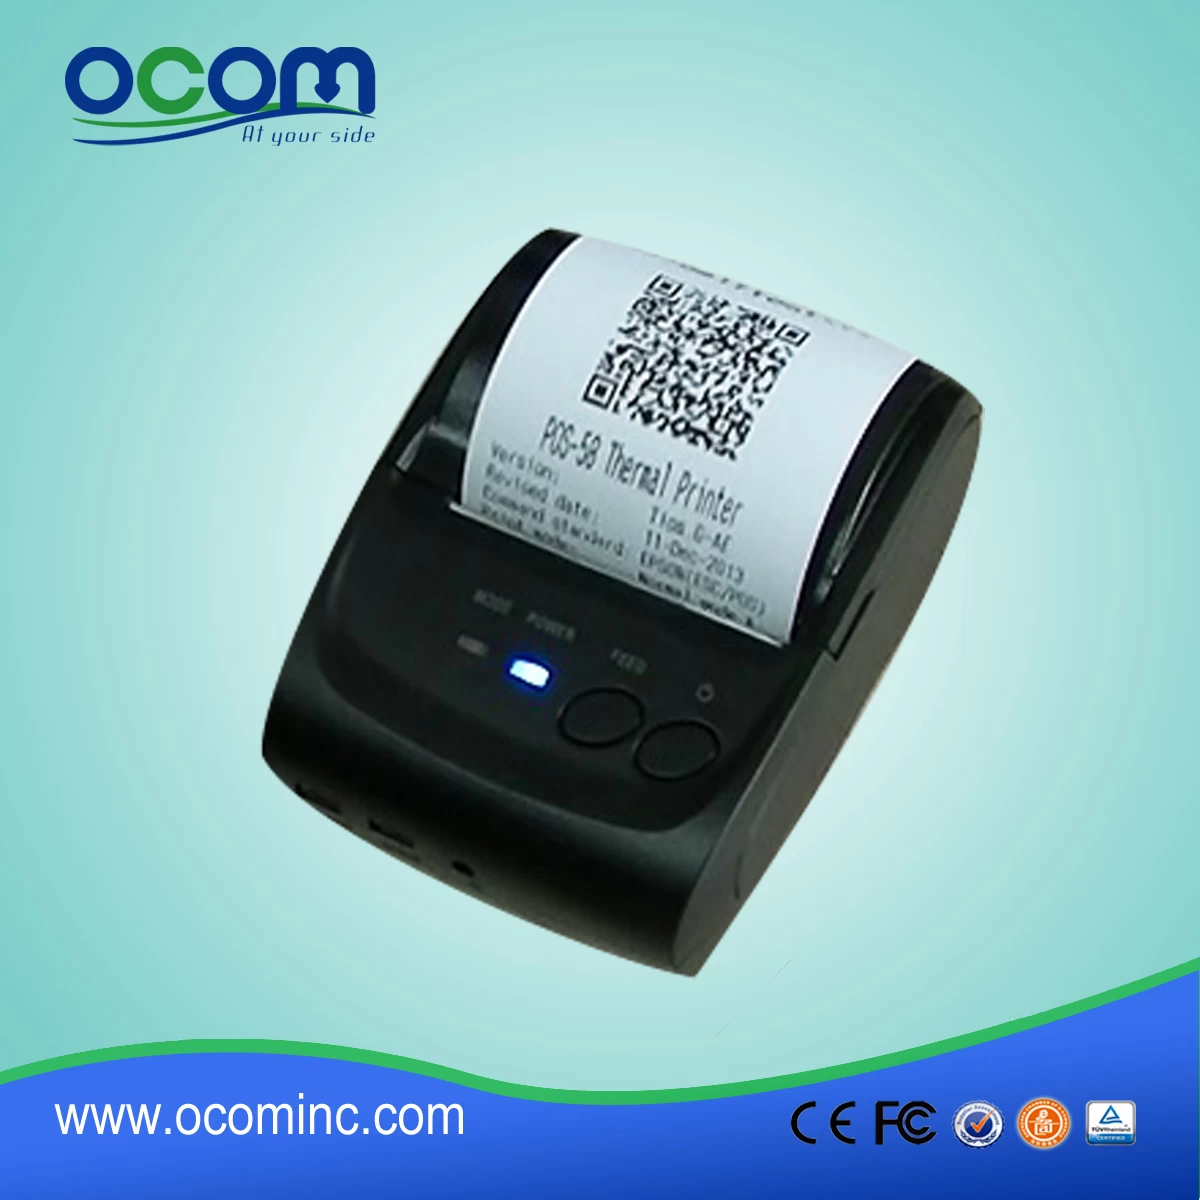 Android and IOS Mini bluetooth thermal receipt printer with SDK